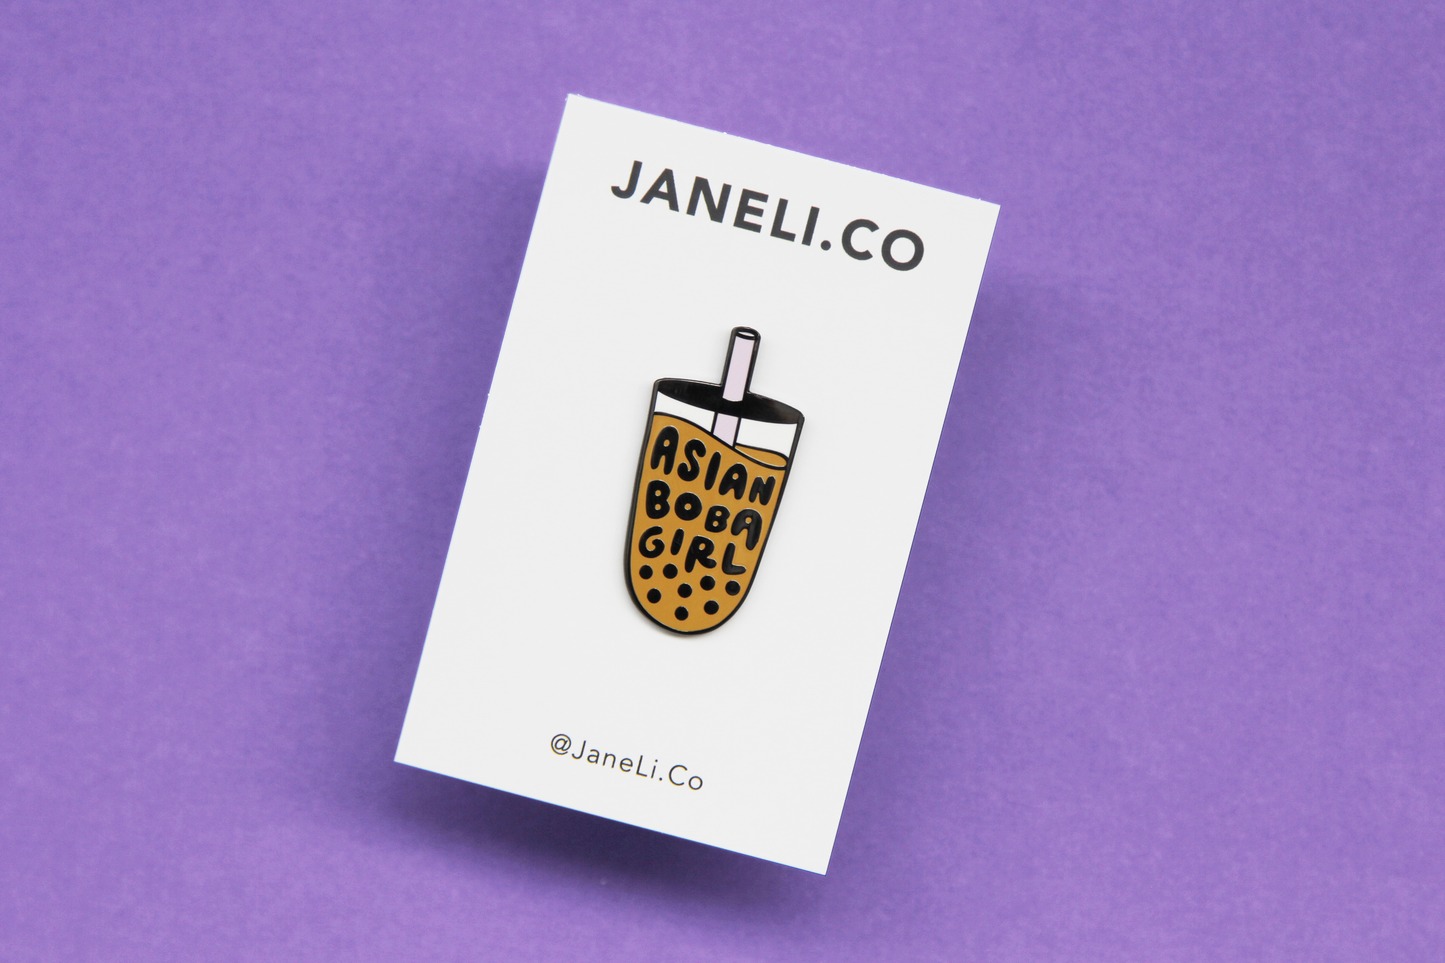 An enamel pin showing a cup of boba that says "Asian Boba Girl" with a purple straw on a white JaneLi.Co backing card over a purple background.